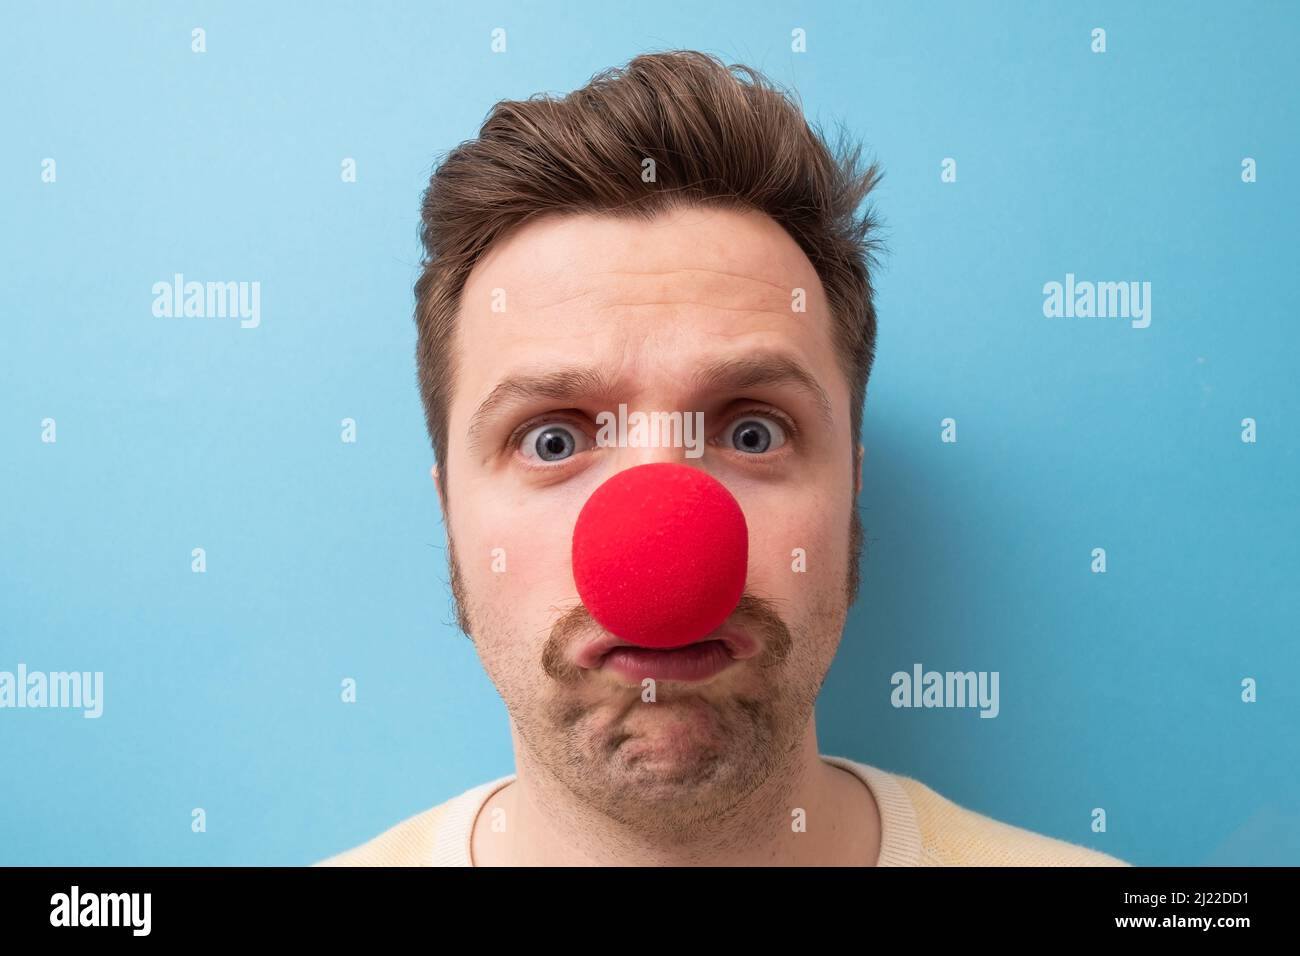 Caucasian man wearing clown red nose isolated on blue background. He is upset that nobody came to his party. Stock Photo